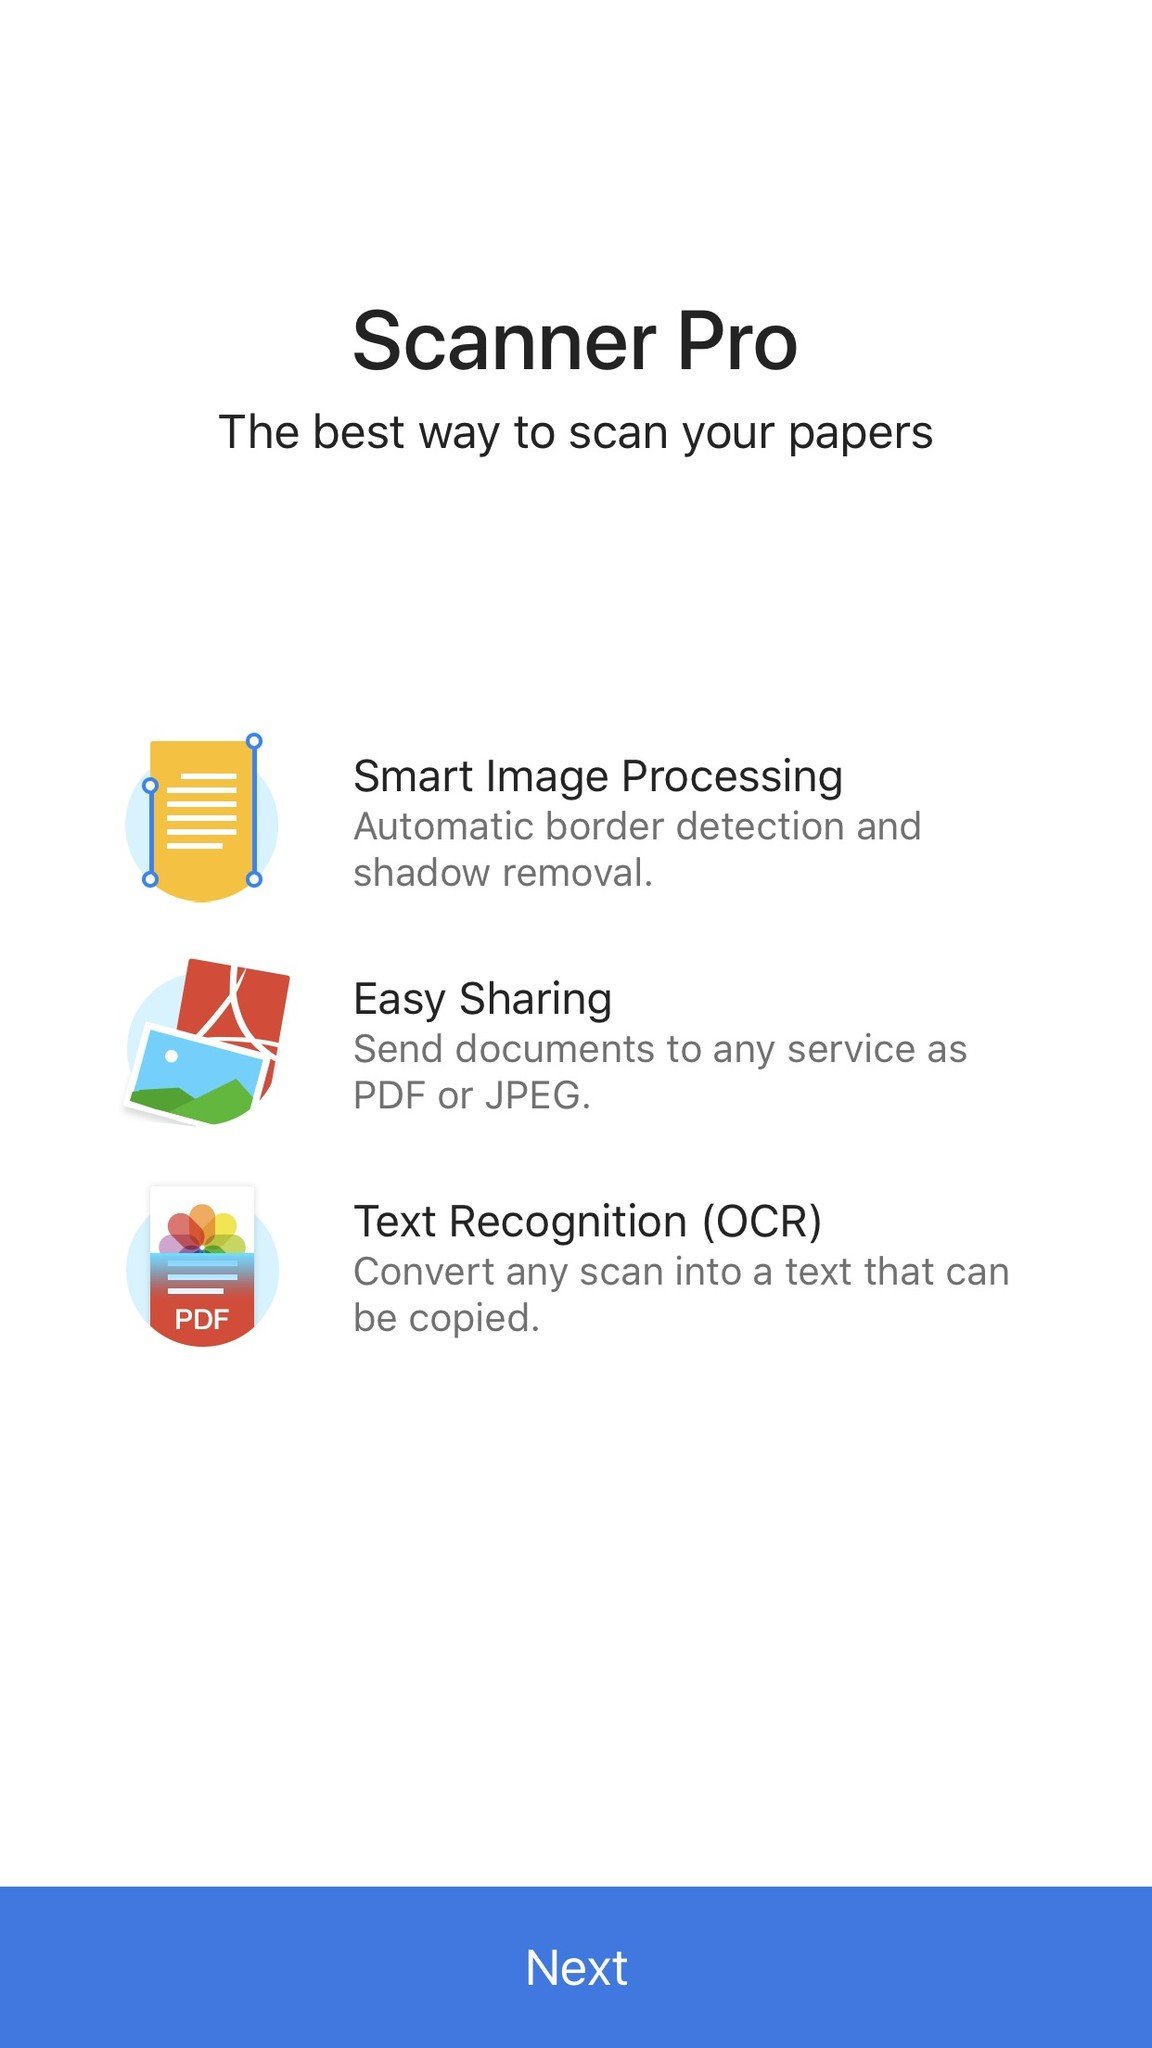 Scanner Pro for iOS